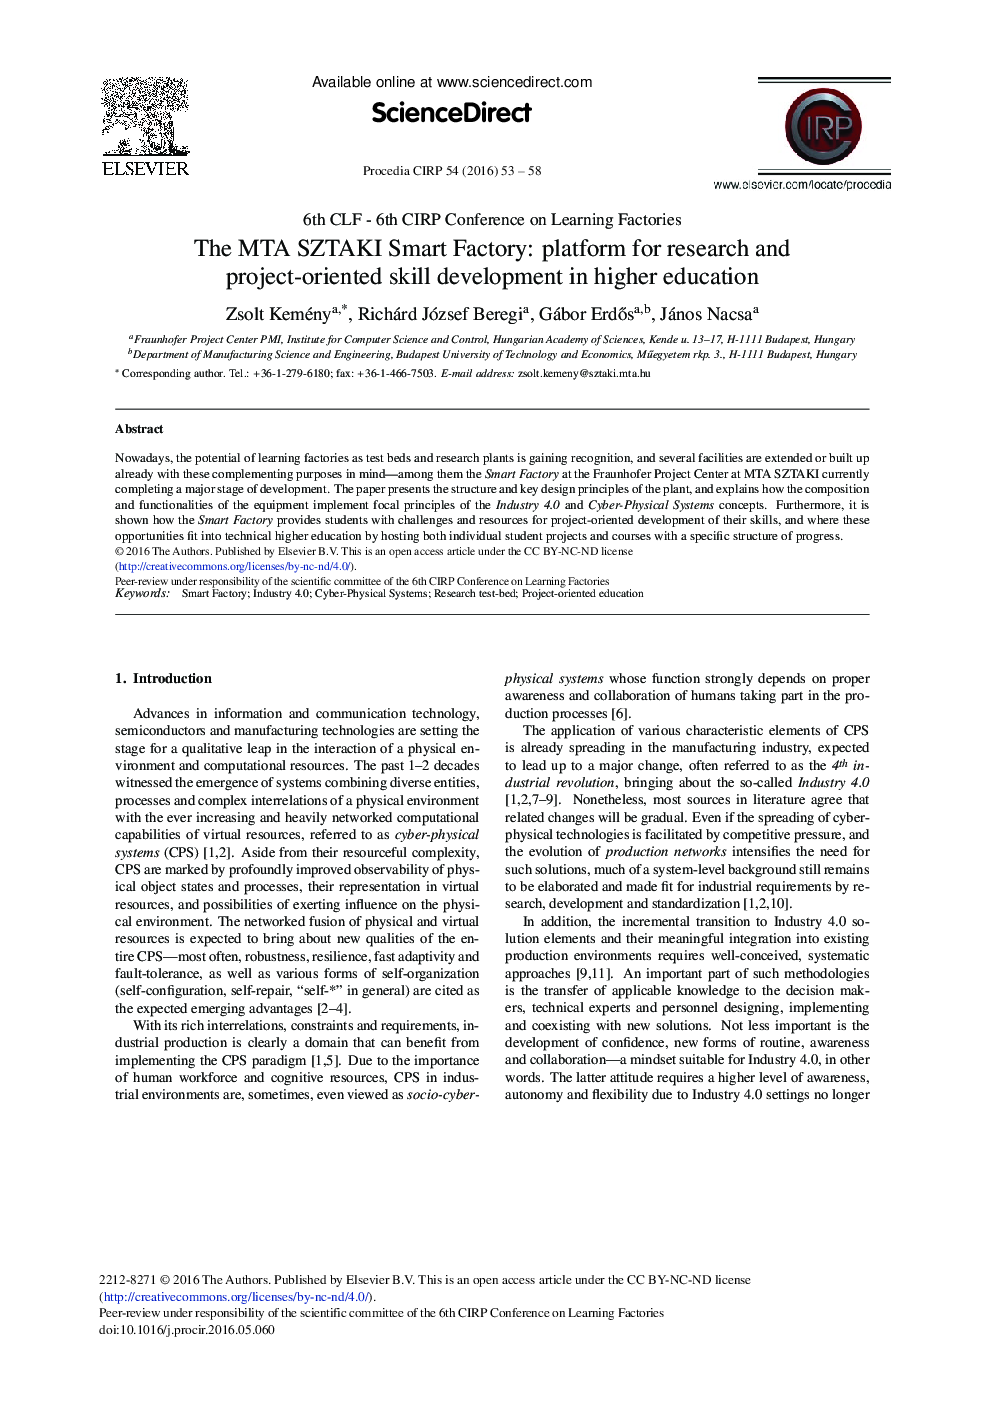 The MTA SZTAKI Smart Factory: Platform for Research and Project-oriented Skill Development in Higher Education